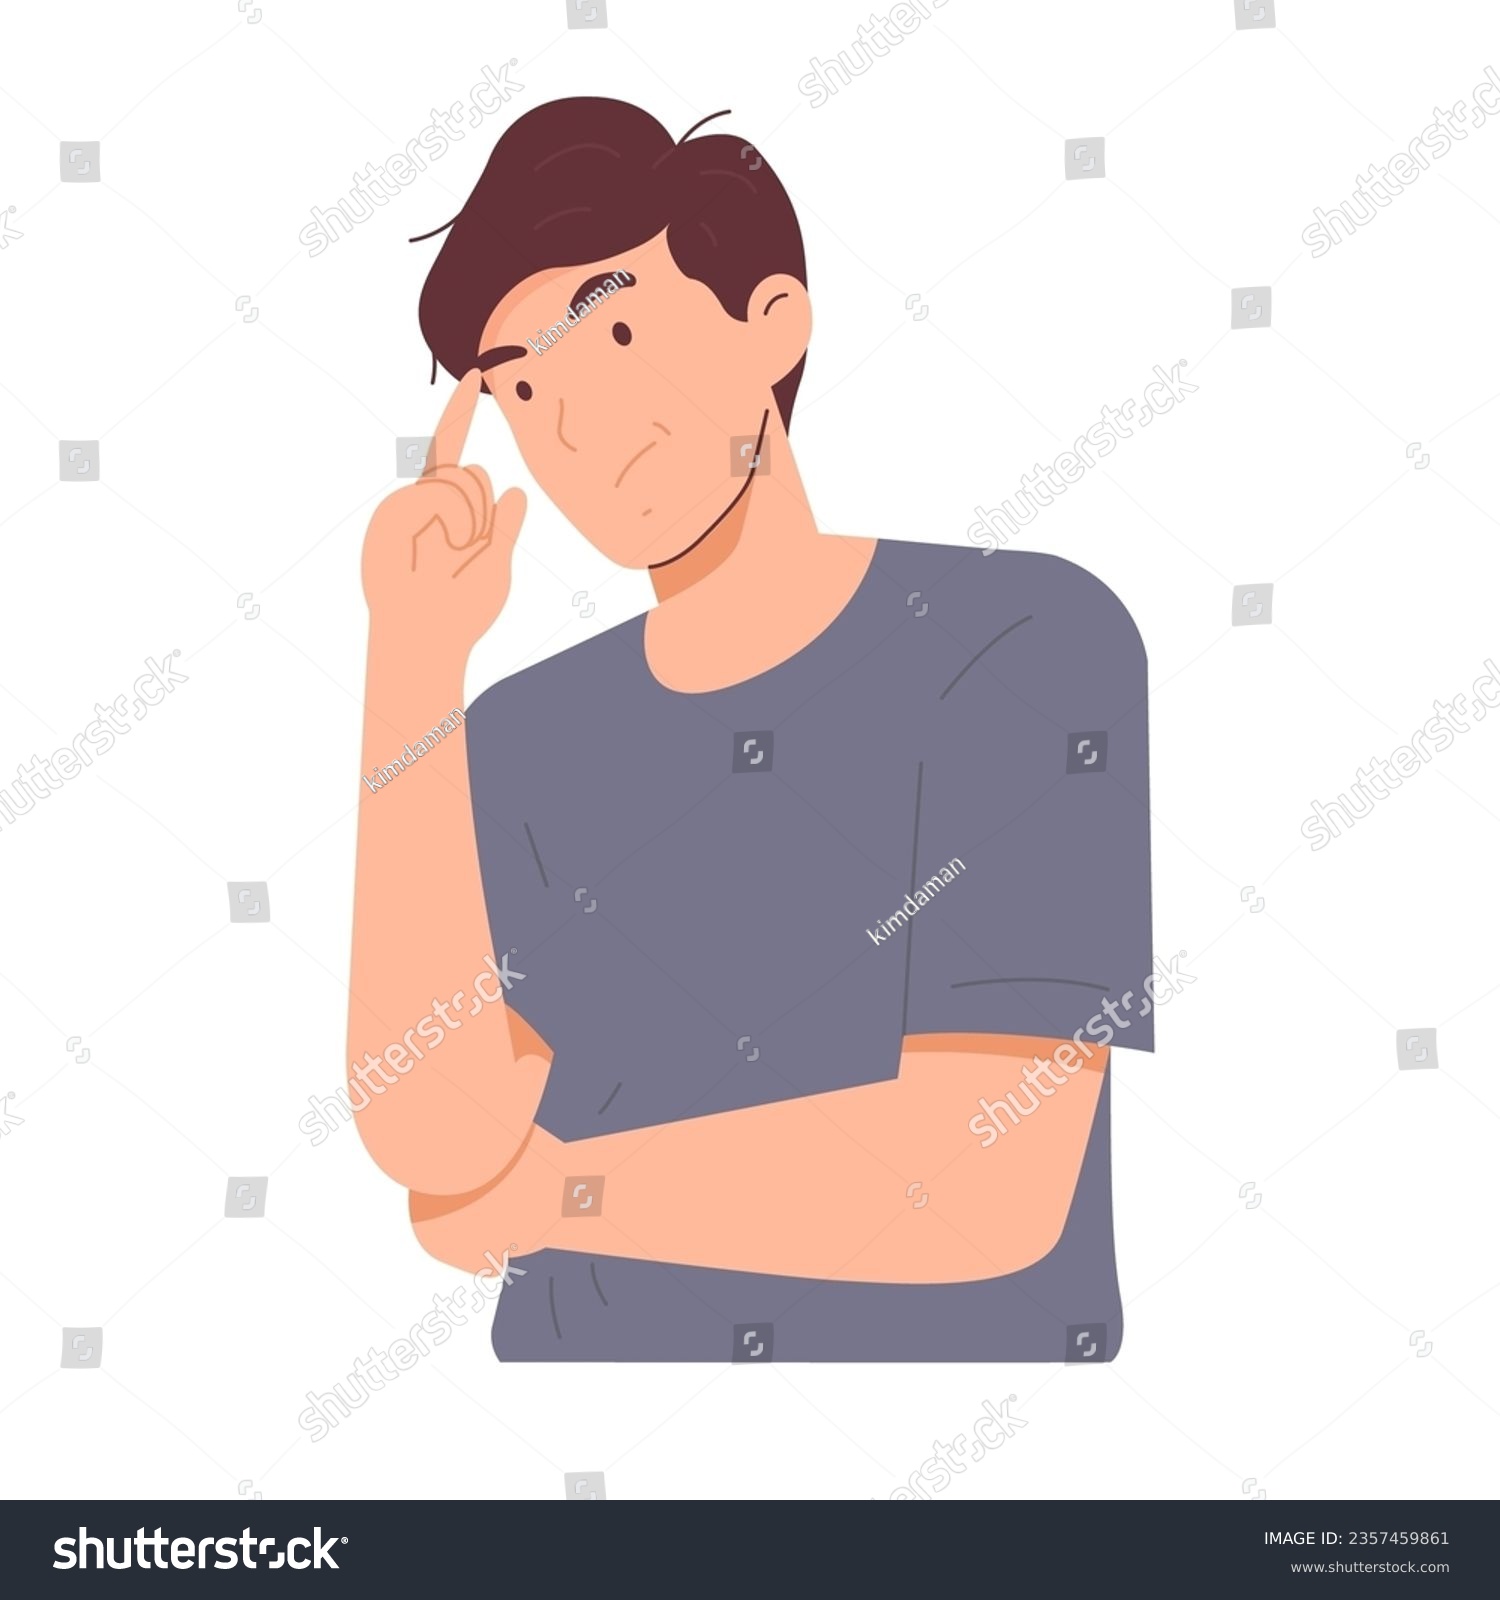 Man is confused by his thoughts or ponders something. Facial expression of curiosity, a face of surprise at a question. Hand drawn vector character illustration. Isolated on white background. #2357459861